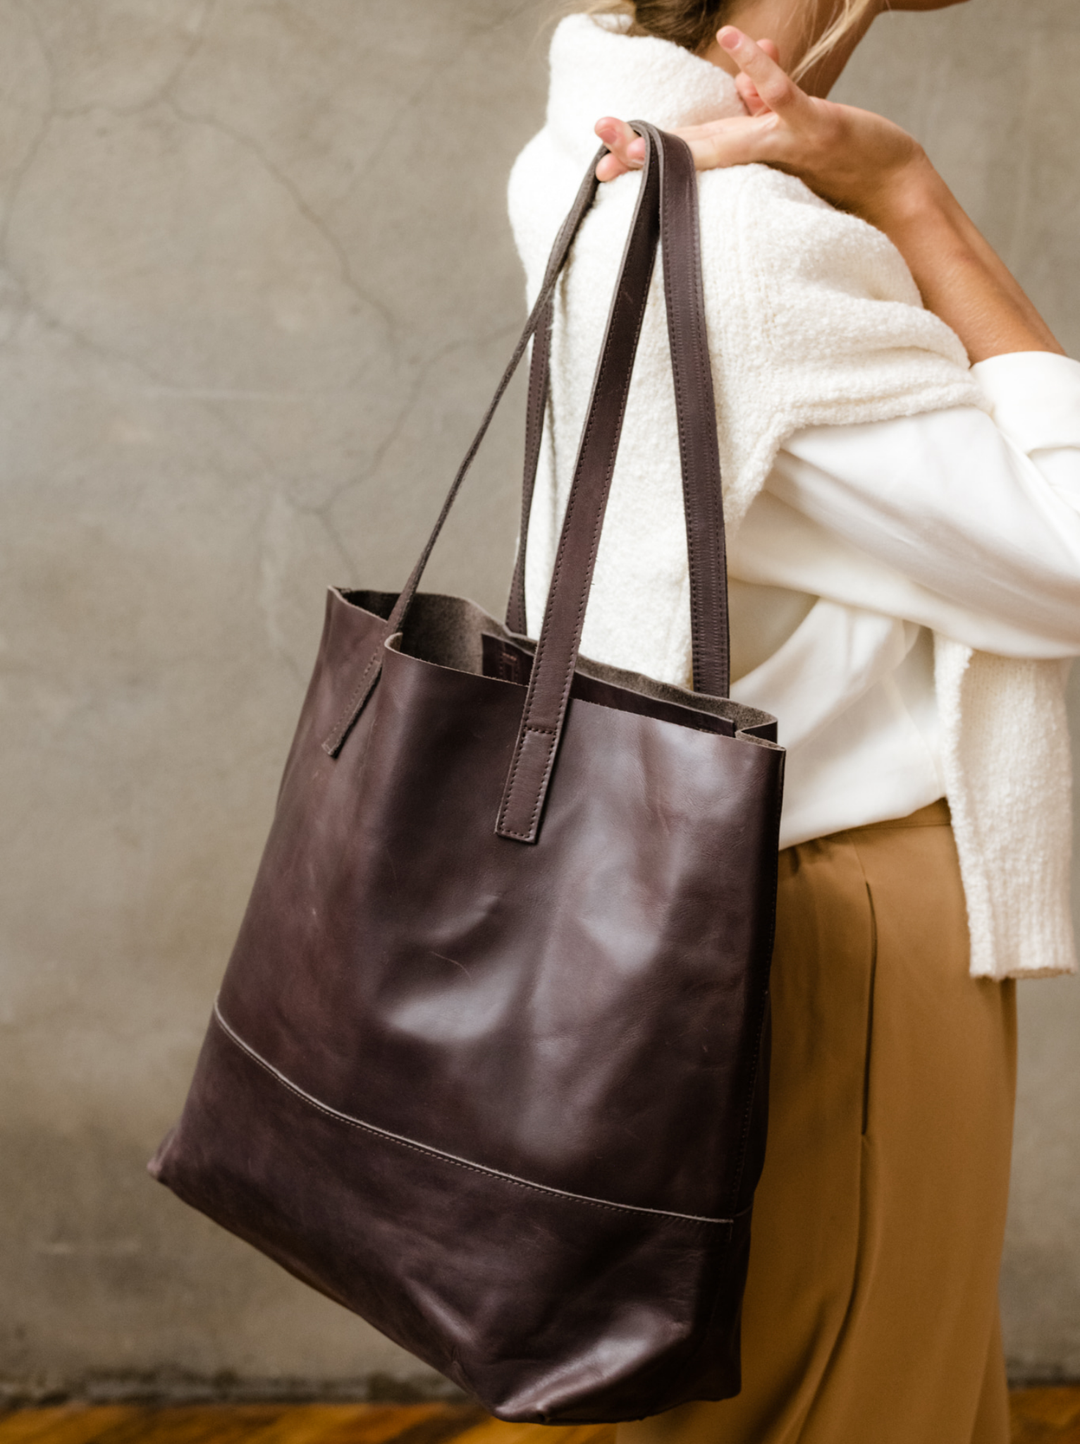 This On-Sale Madewell Tote Will Make Morning Commutes Easy